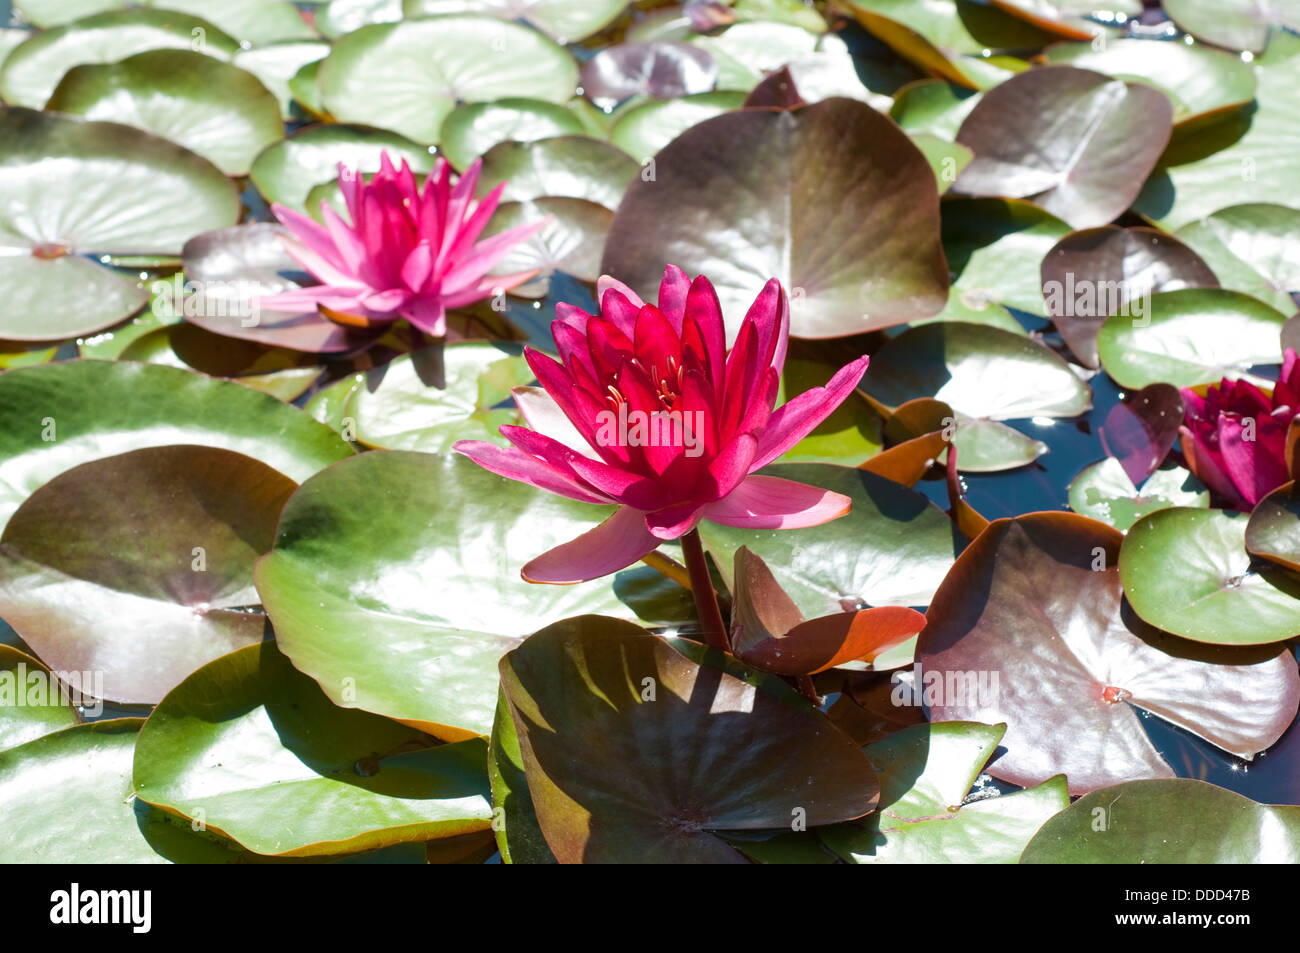 Seerose, Nymphaea "Perrys roter Stern" Stockfoto